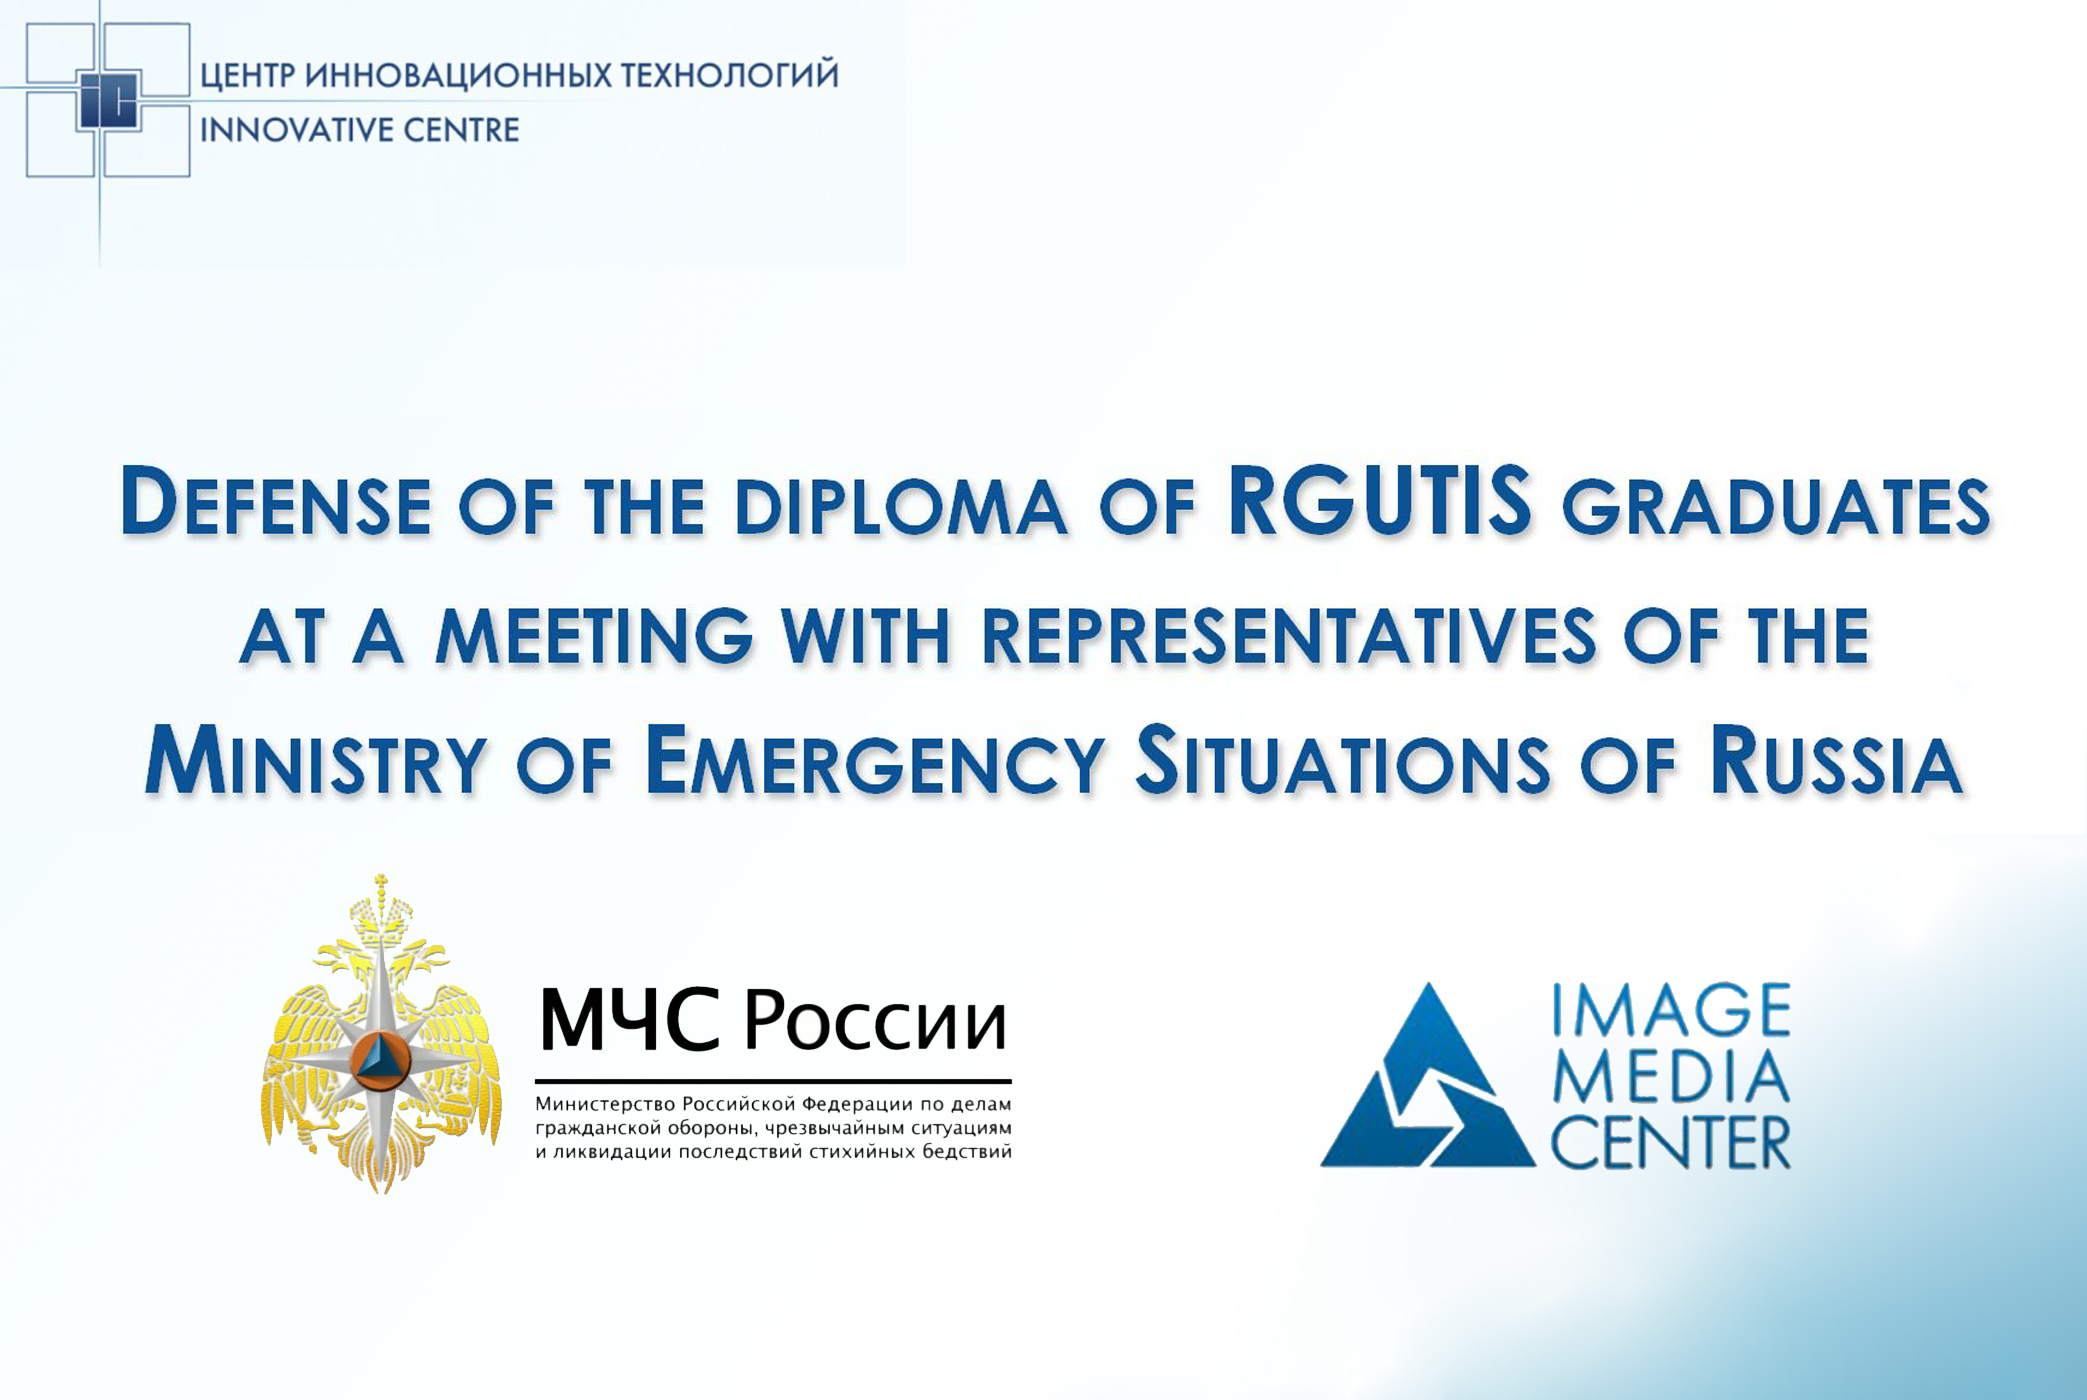 Defense of the diploma of RGUTIS graduates at a meeting with representatives of the Ministry of Emergency Situations of Russia